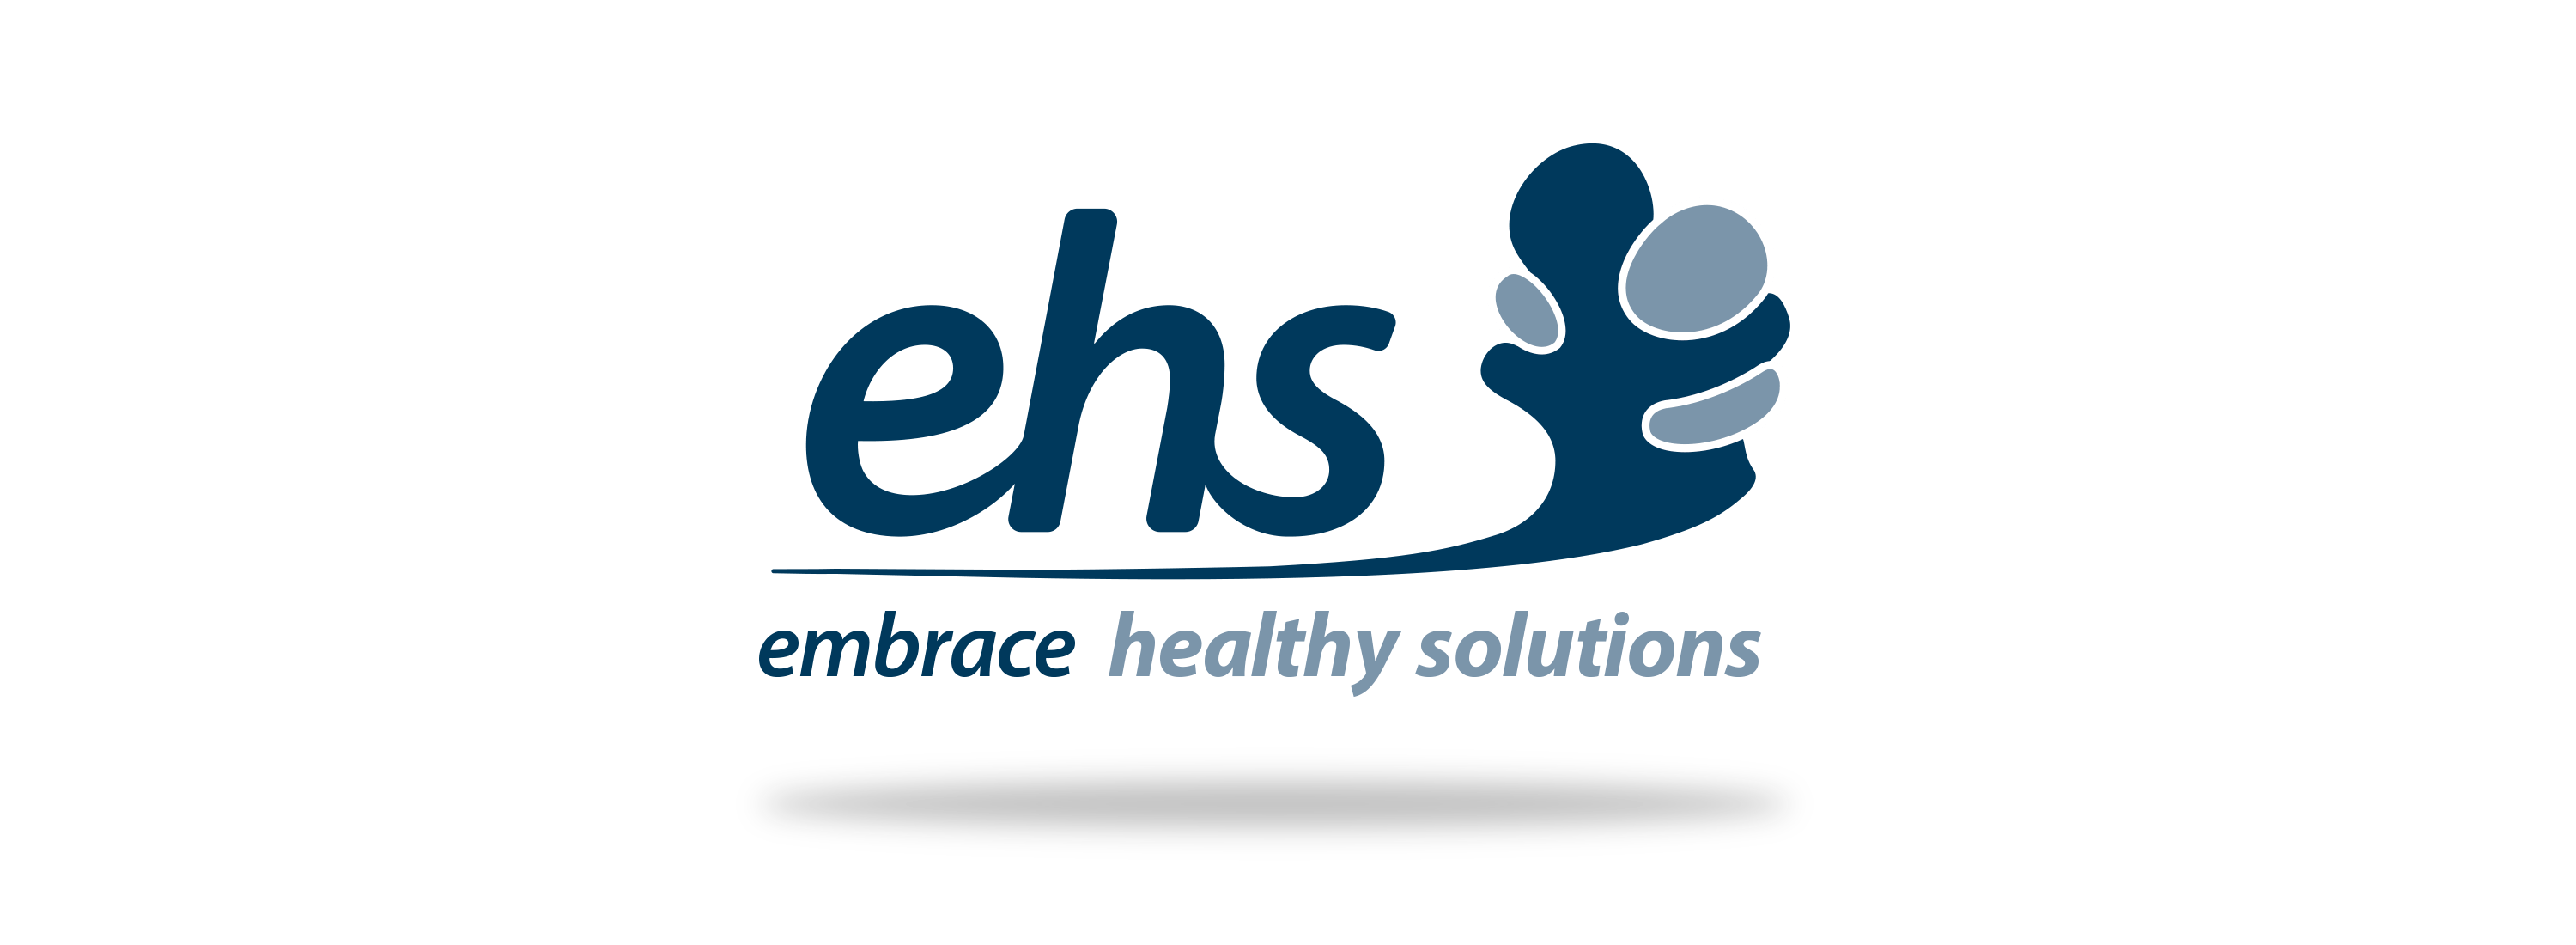 EHS Logo - embrace healthy solutions | Homepage